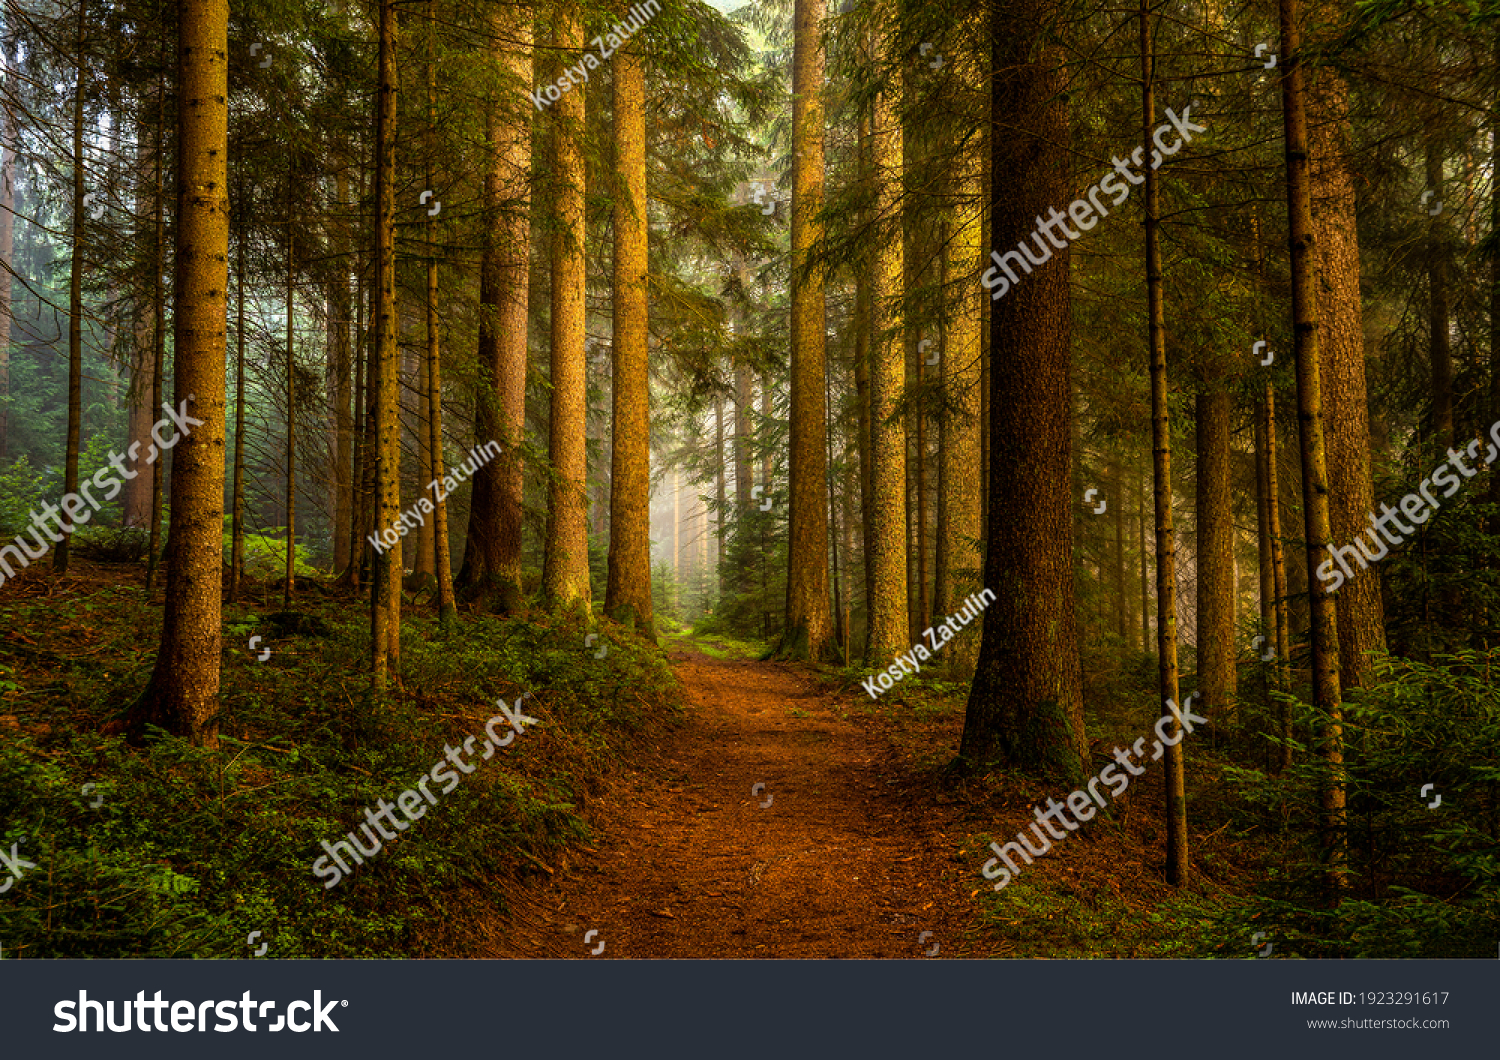 Pine forest trail landscape. Trail in pine grove #1923291617